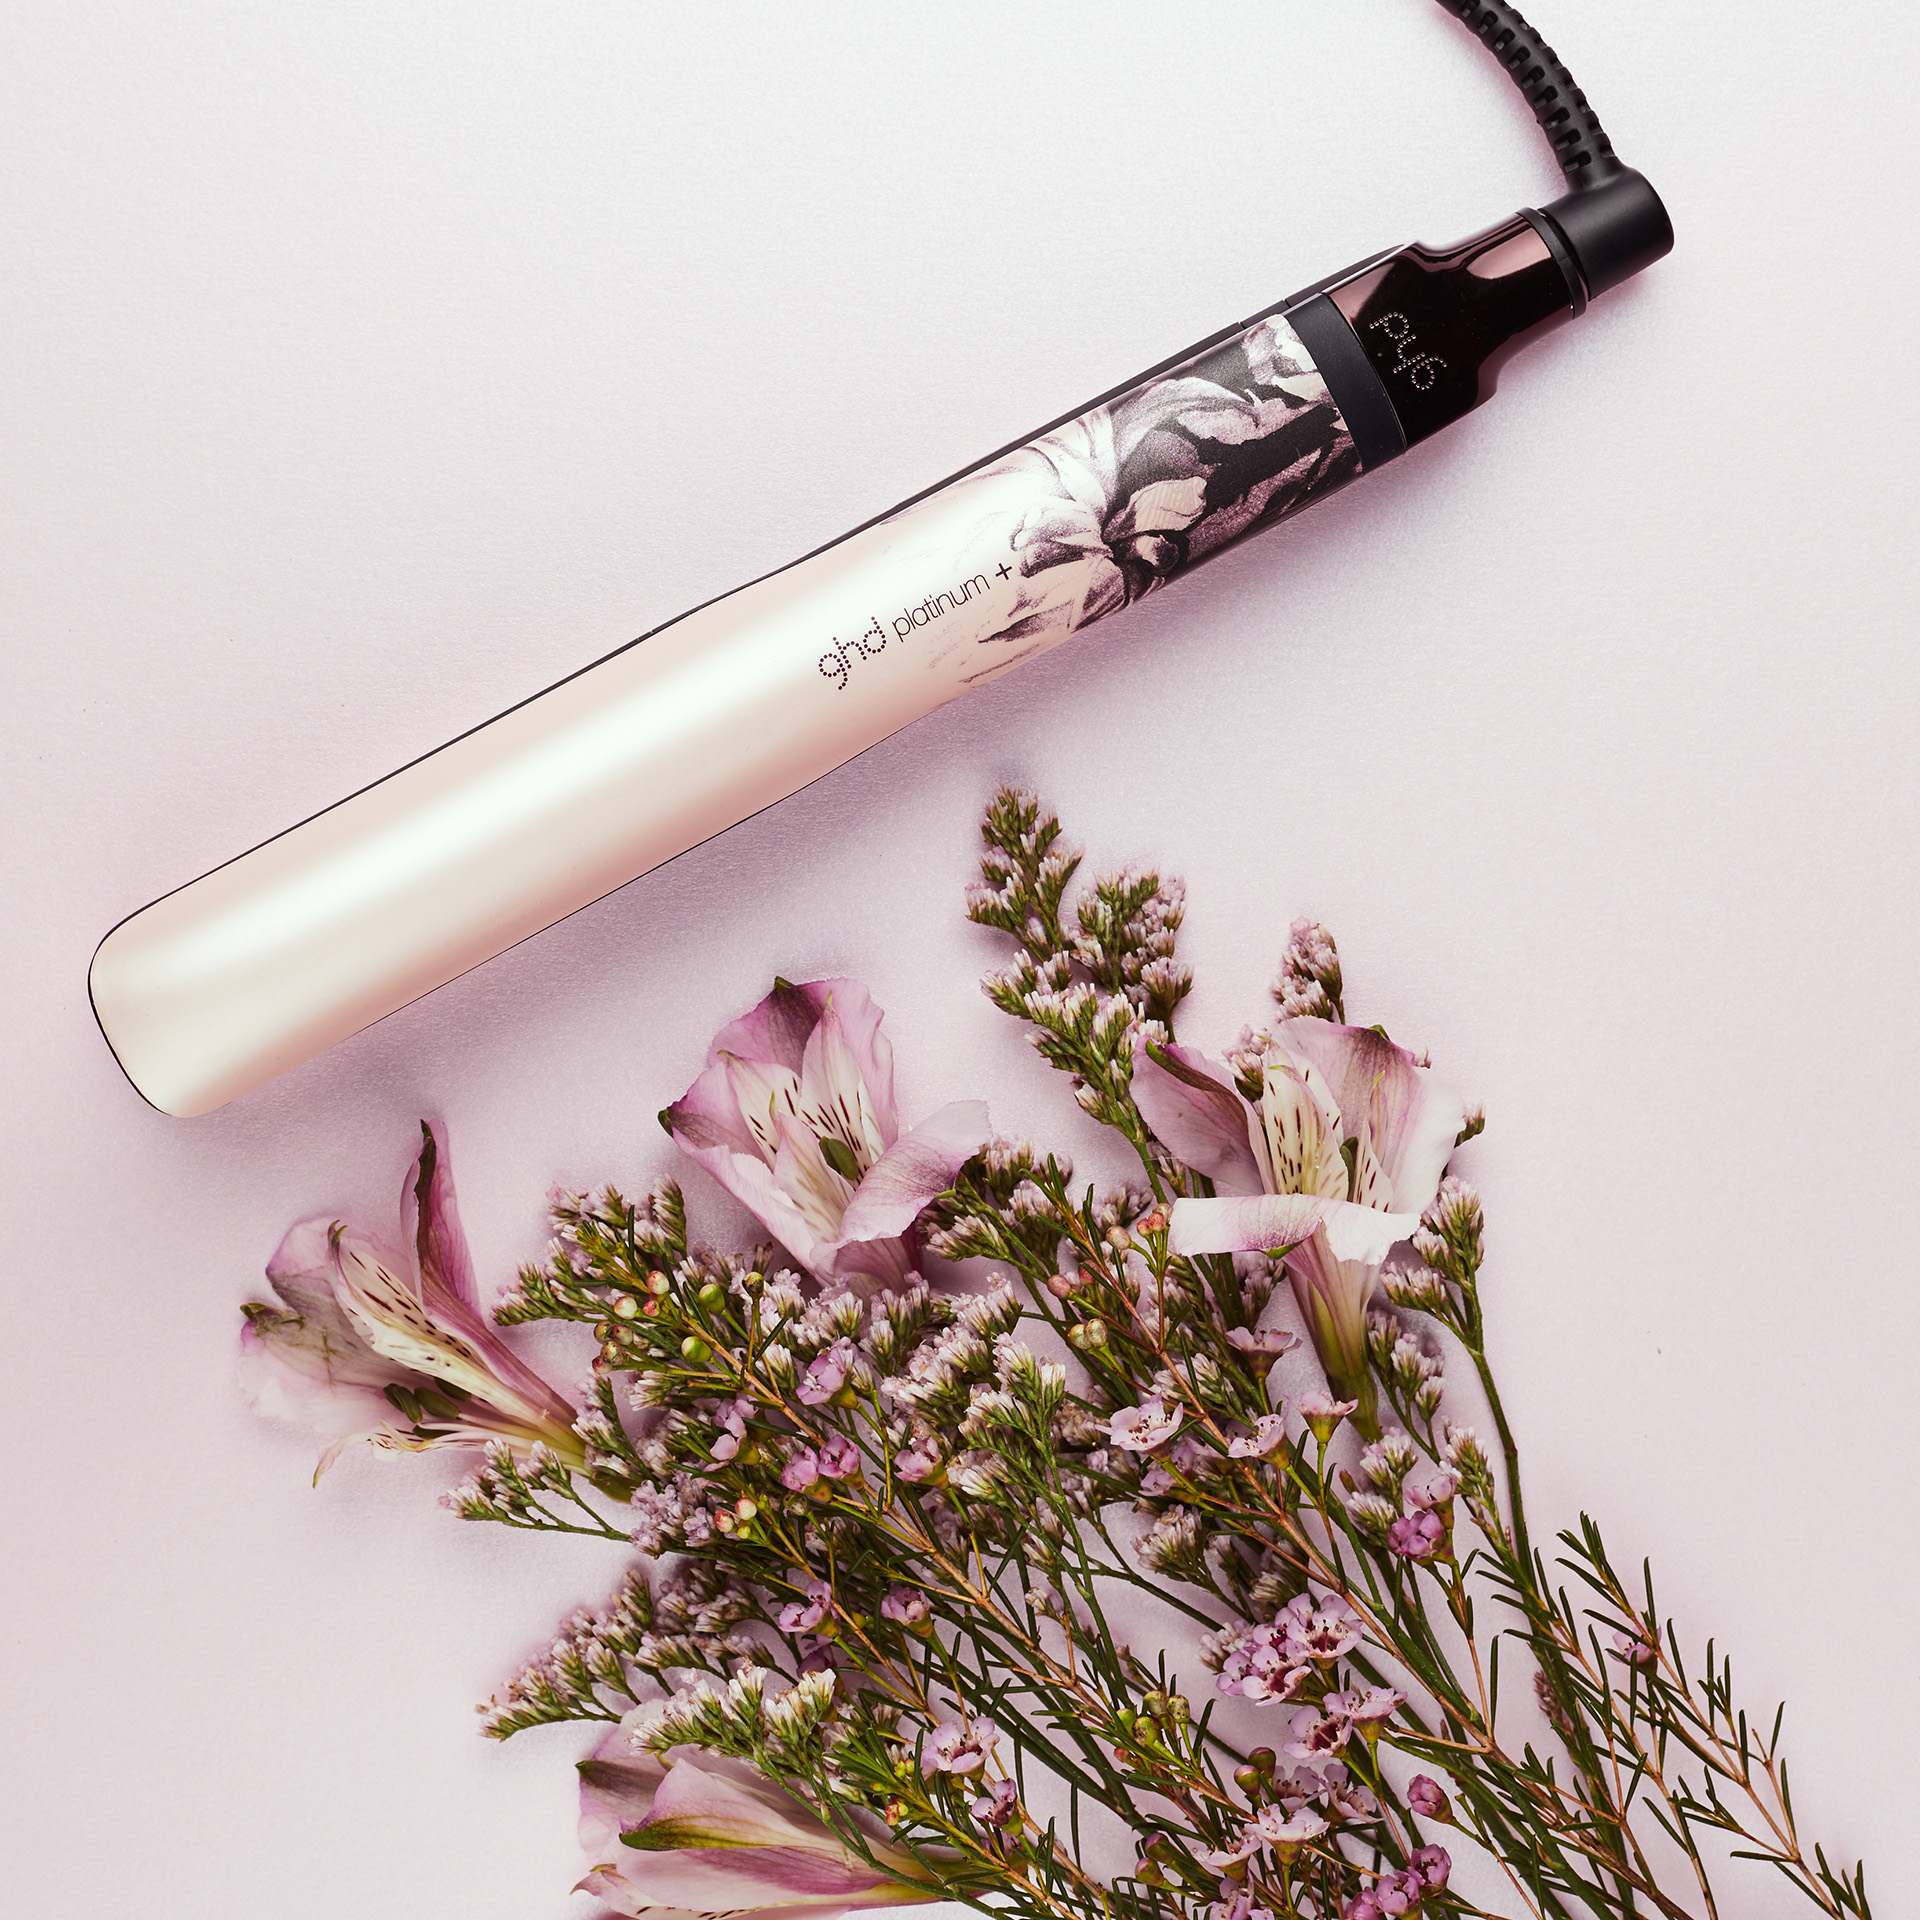 Ghd Ink on Pink Collection - About Beauty